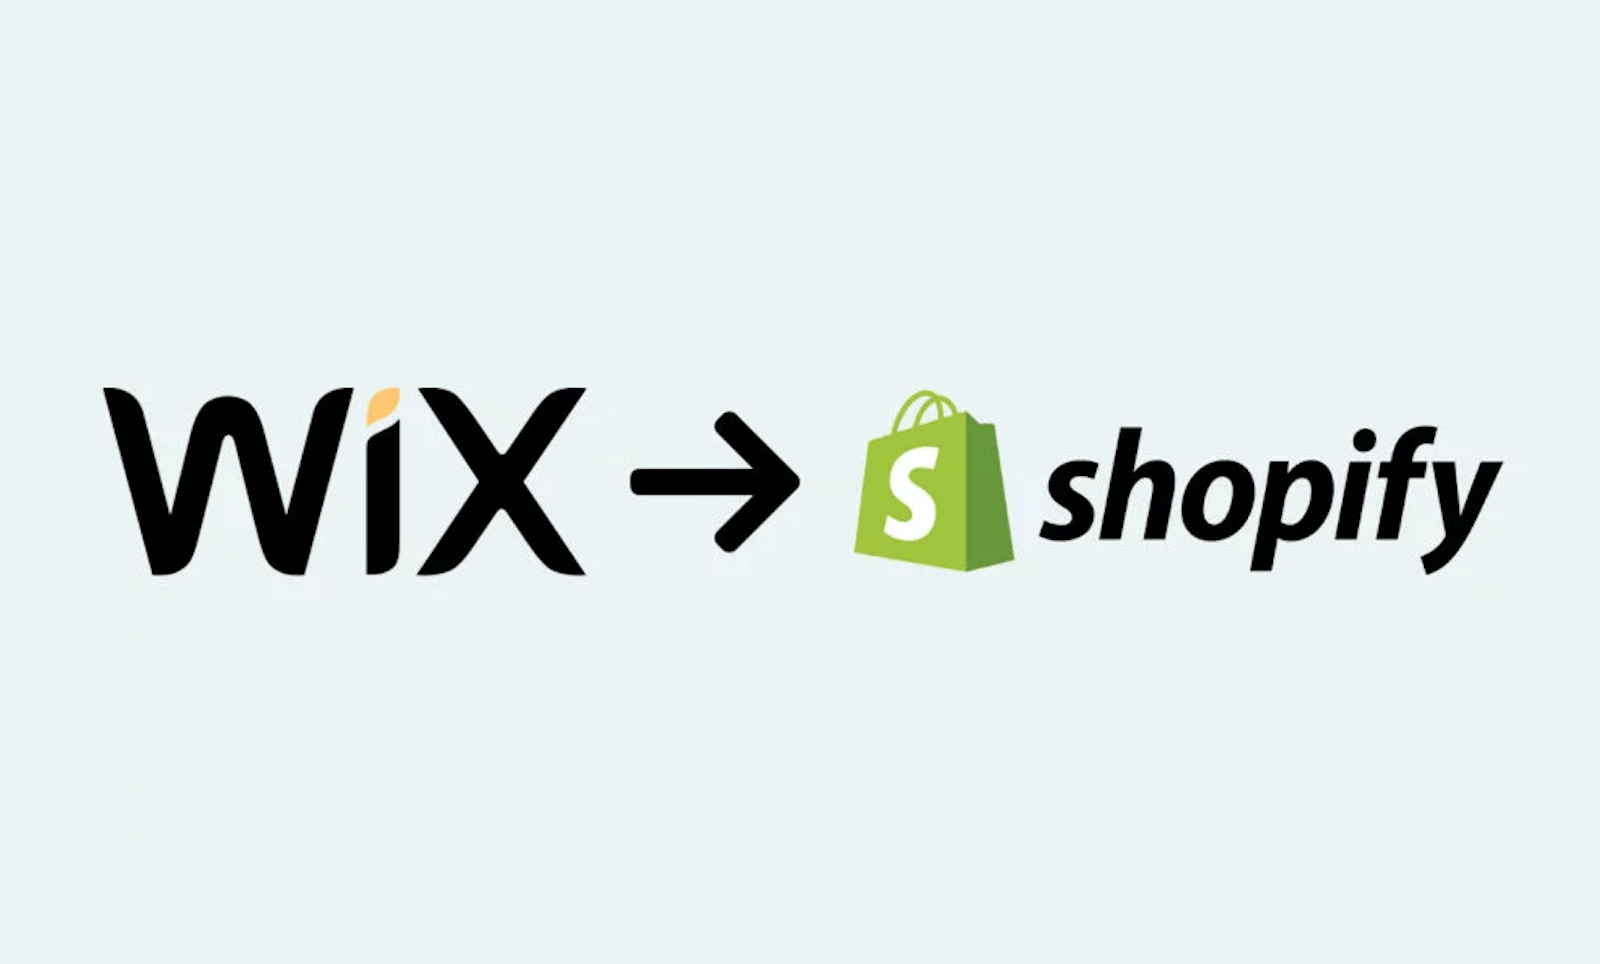 How to migrate wix to Shopify in nigeria Nigeriantech.com.ng